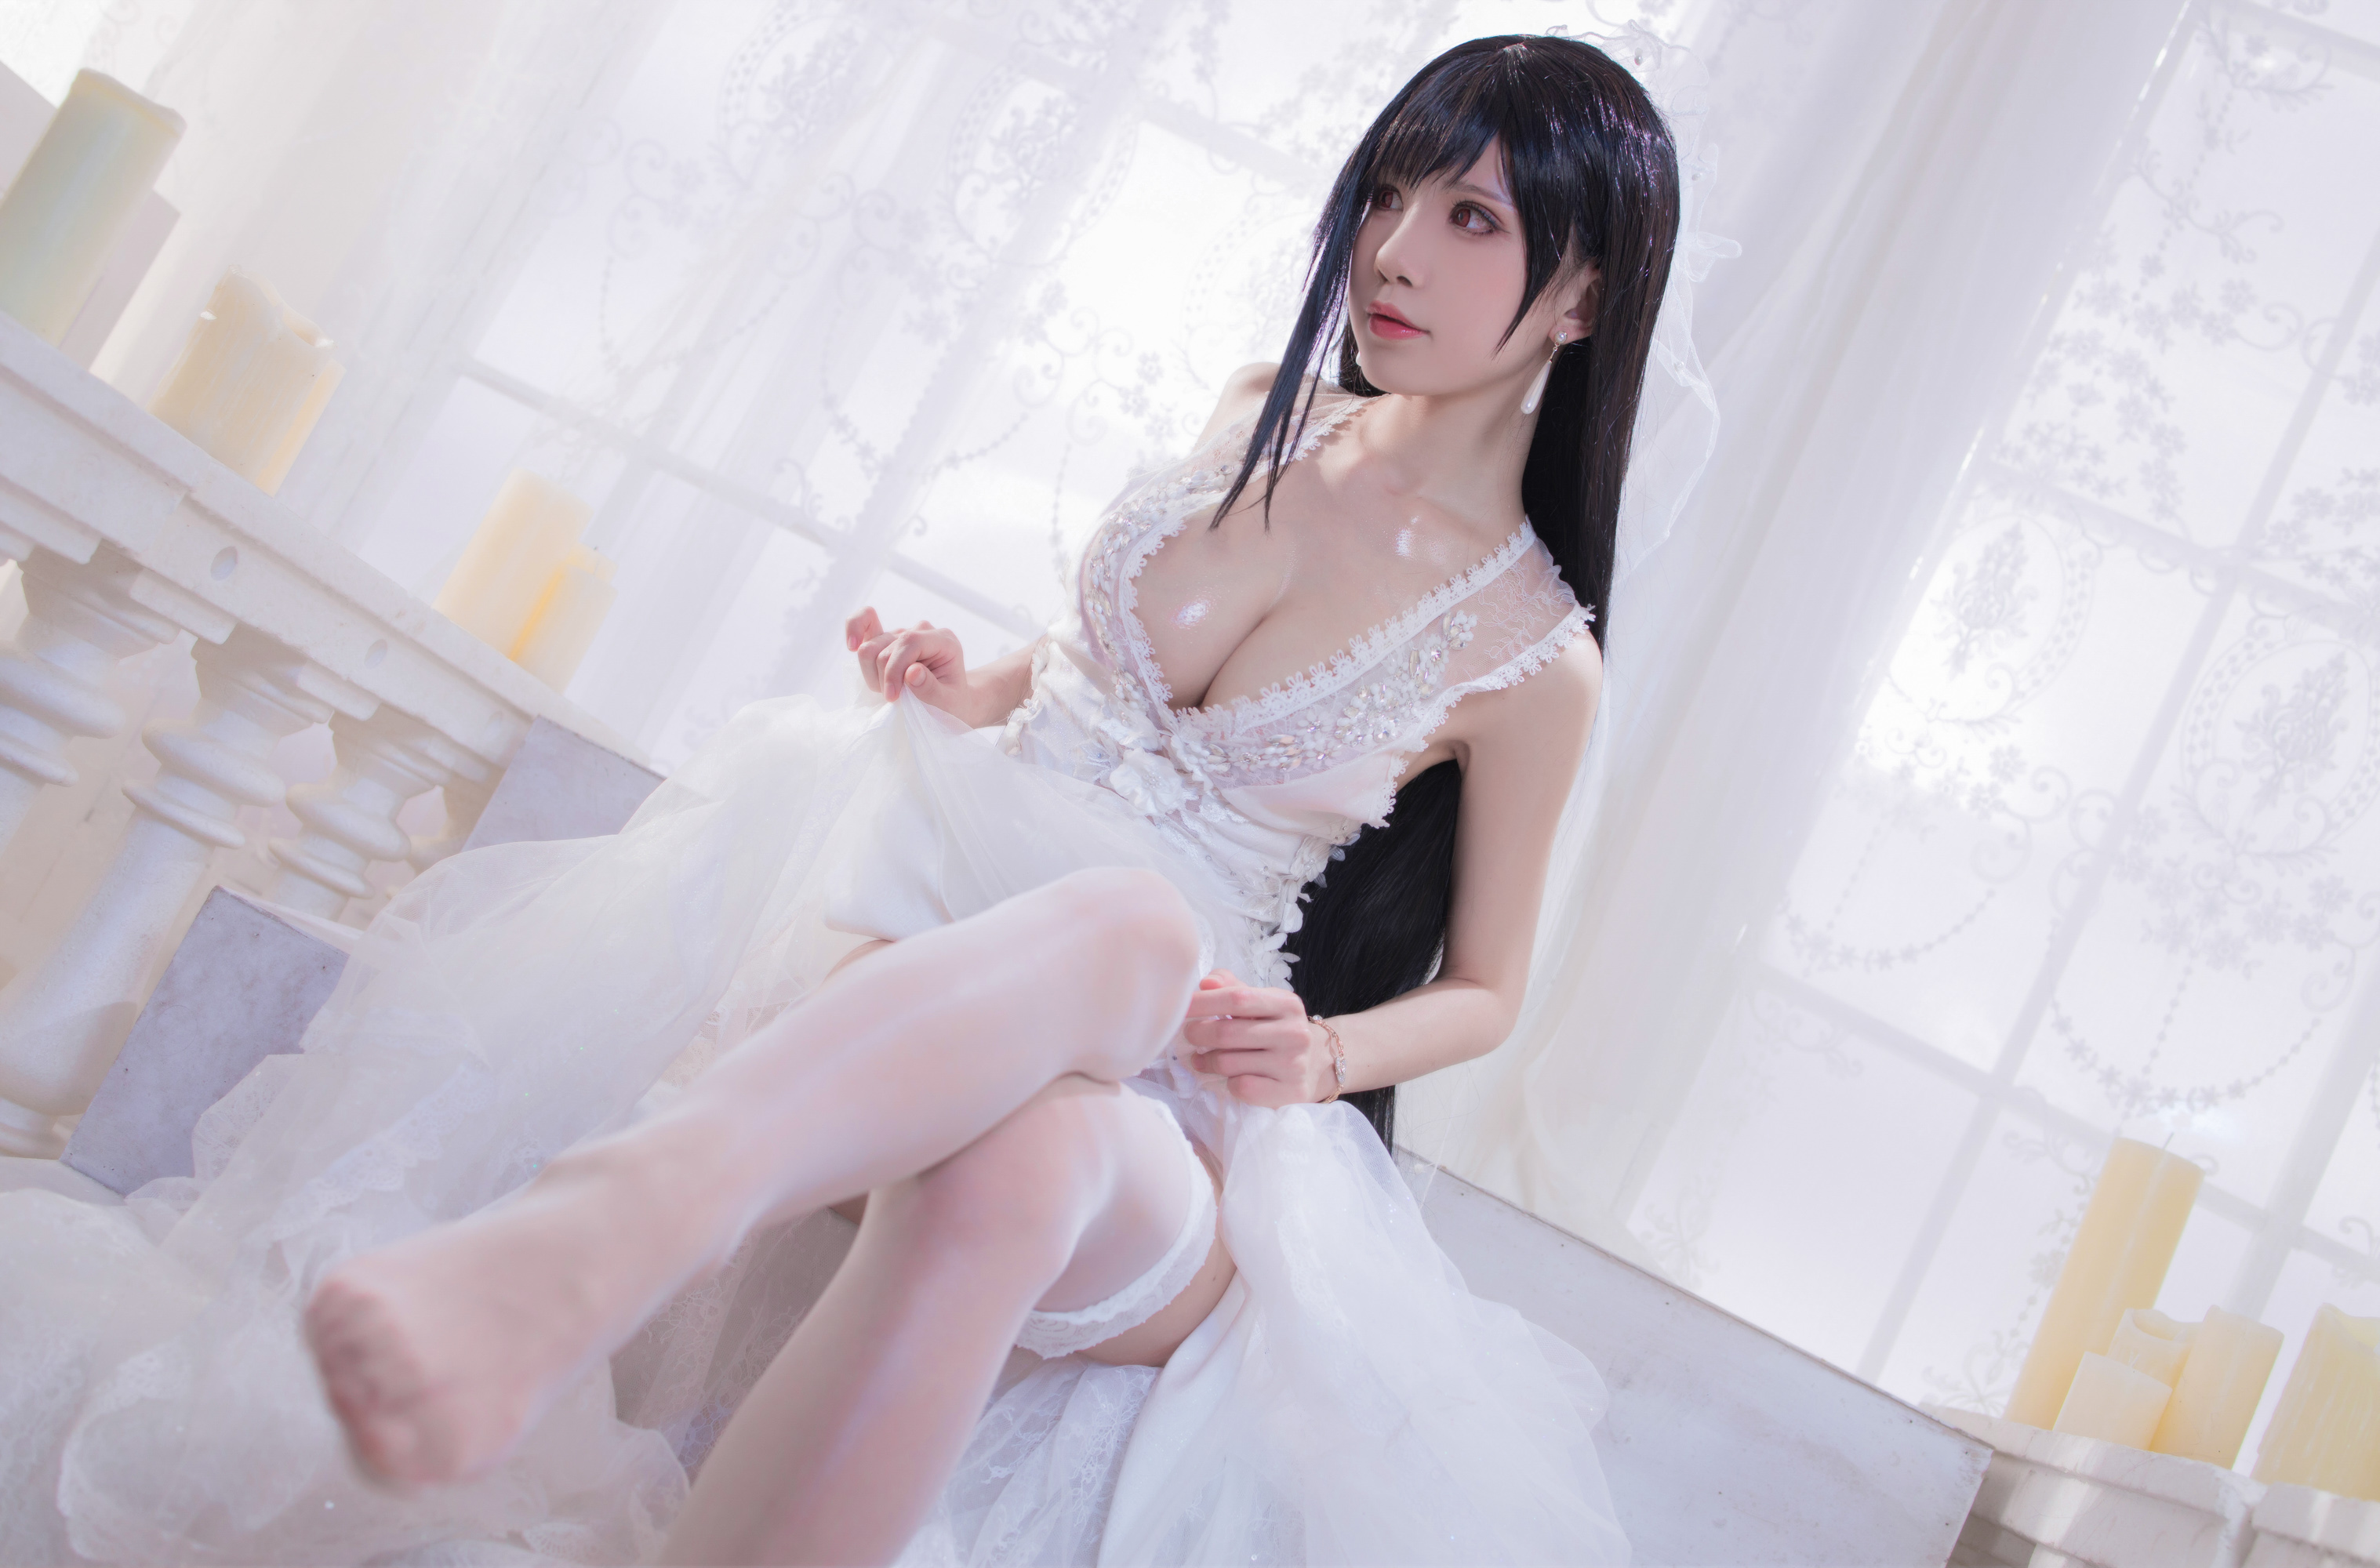 People 3035x2000 women model Asian cosplay Shuimiaoaqua Chinese model Chinese Final Fantasy VII Final Fantasy VII: Remake Tifa Lockhart cleavage women indoors black hair dark hair stockings body oil pointed toes Chinese women feet